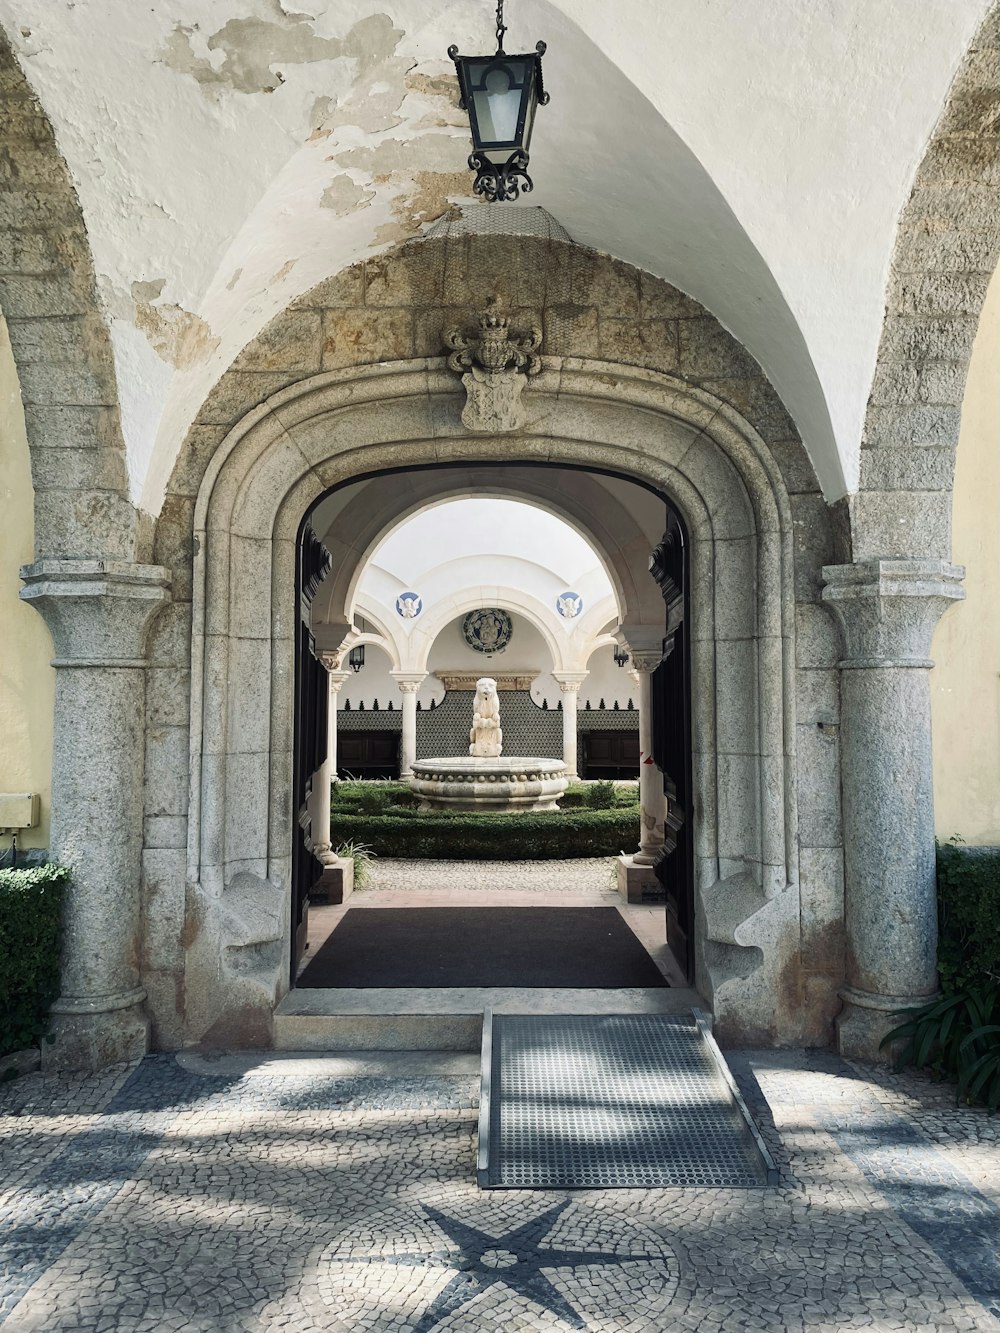 an archway leading into a courtyard with a fountain